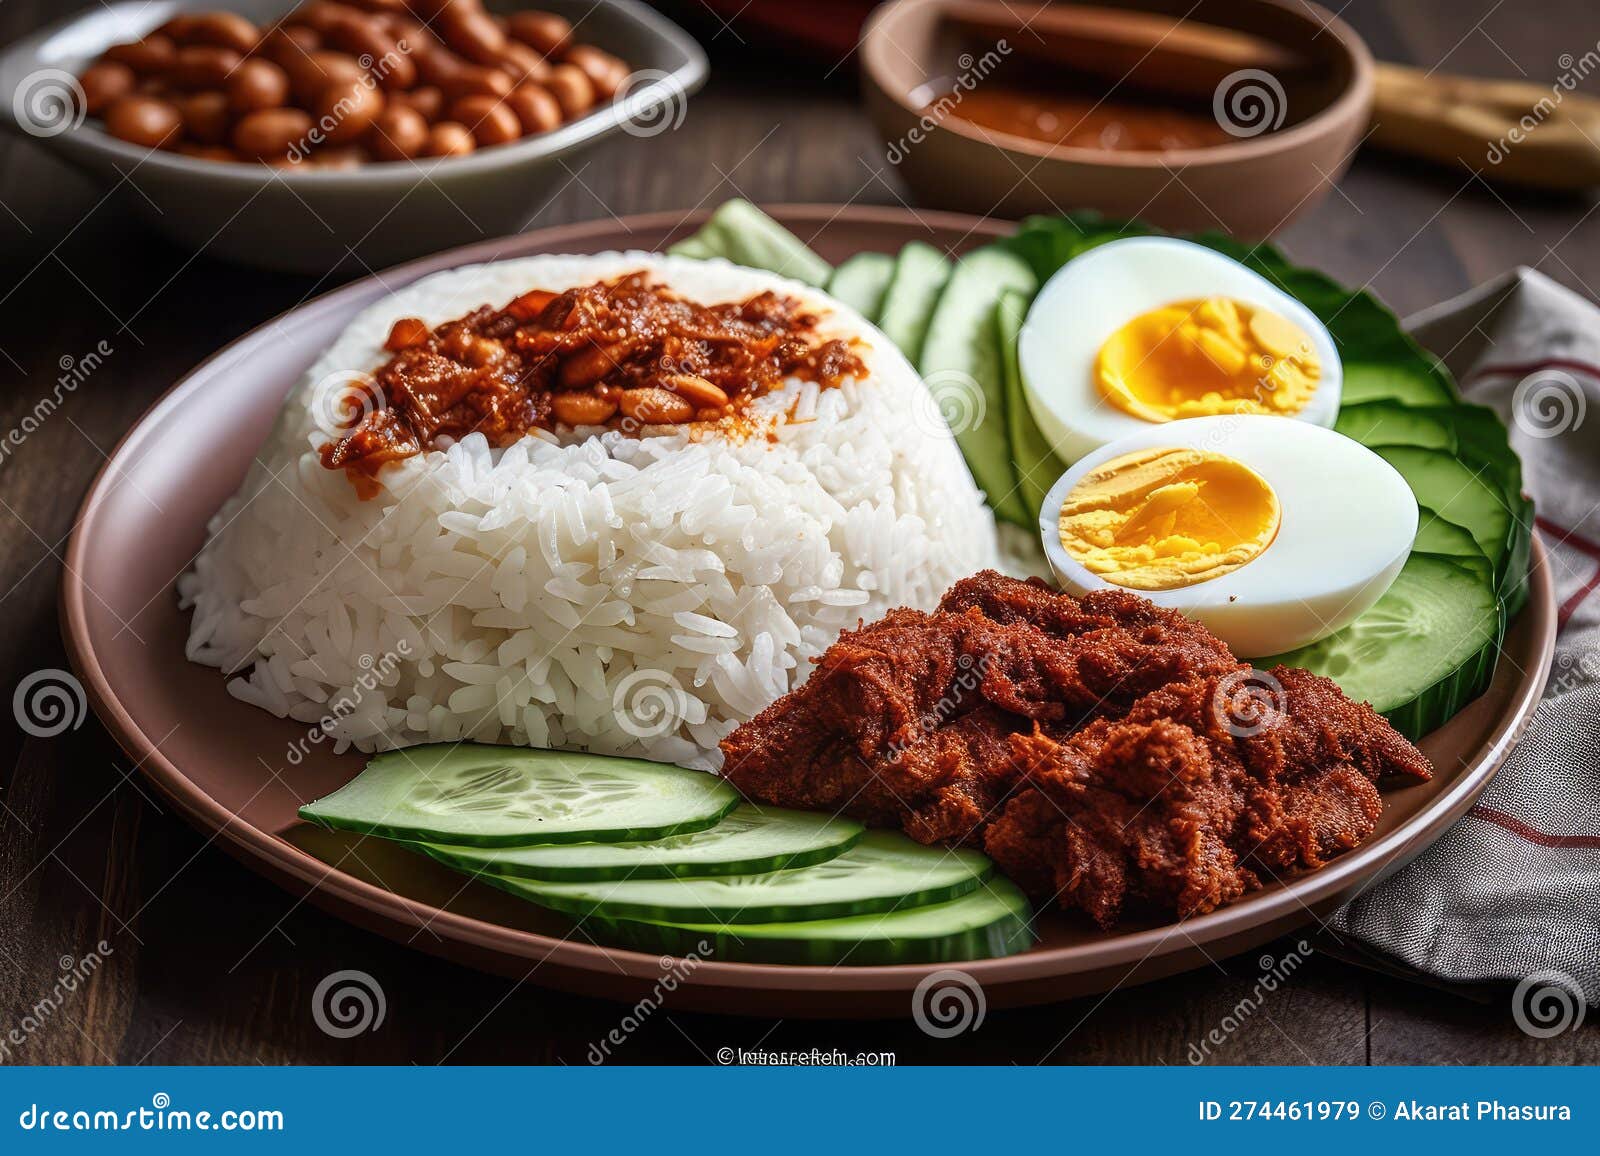 nasi lemak is a commonly found food in malaysia, brunei and singapore. it is also an unofficial national food in malaysia.